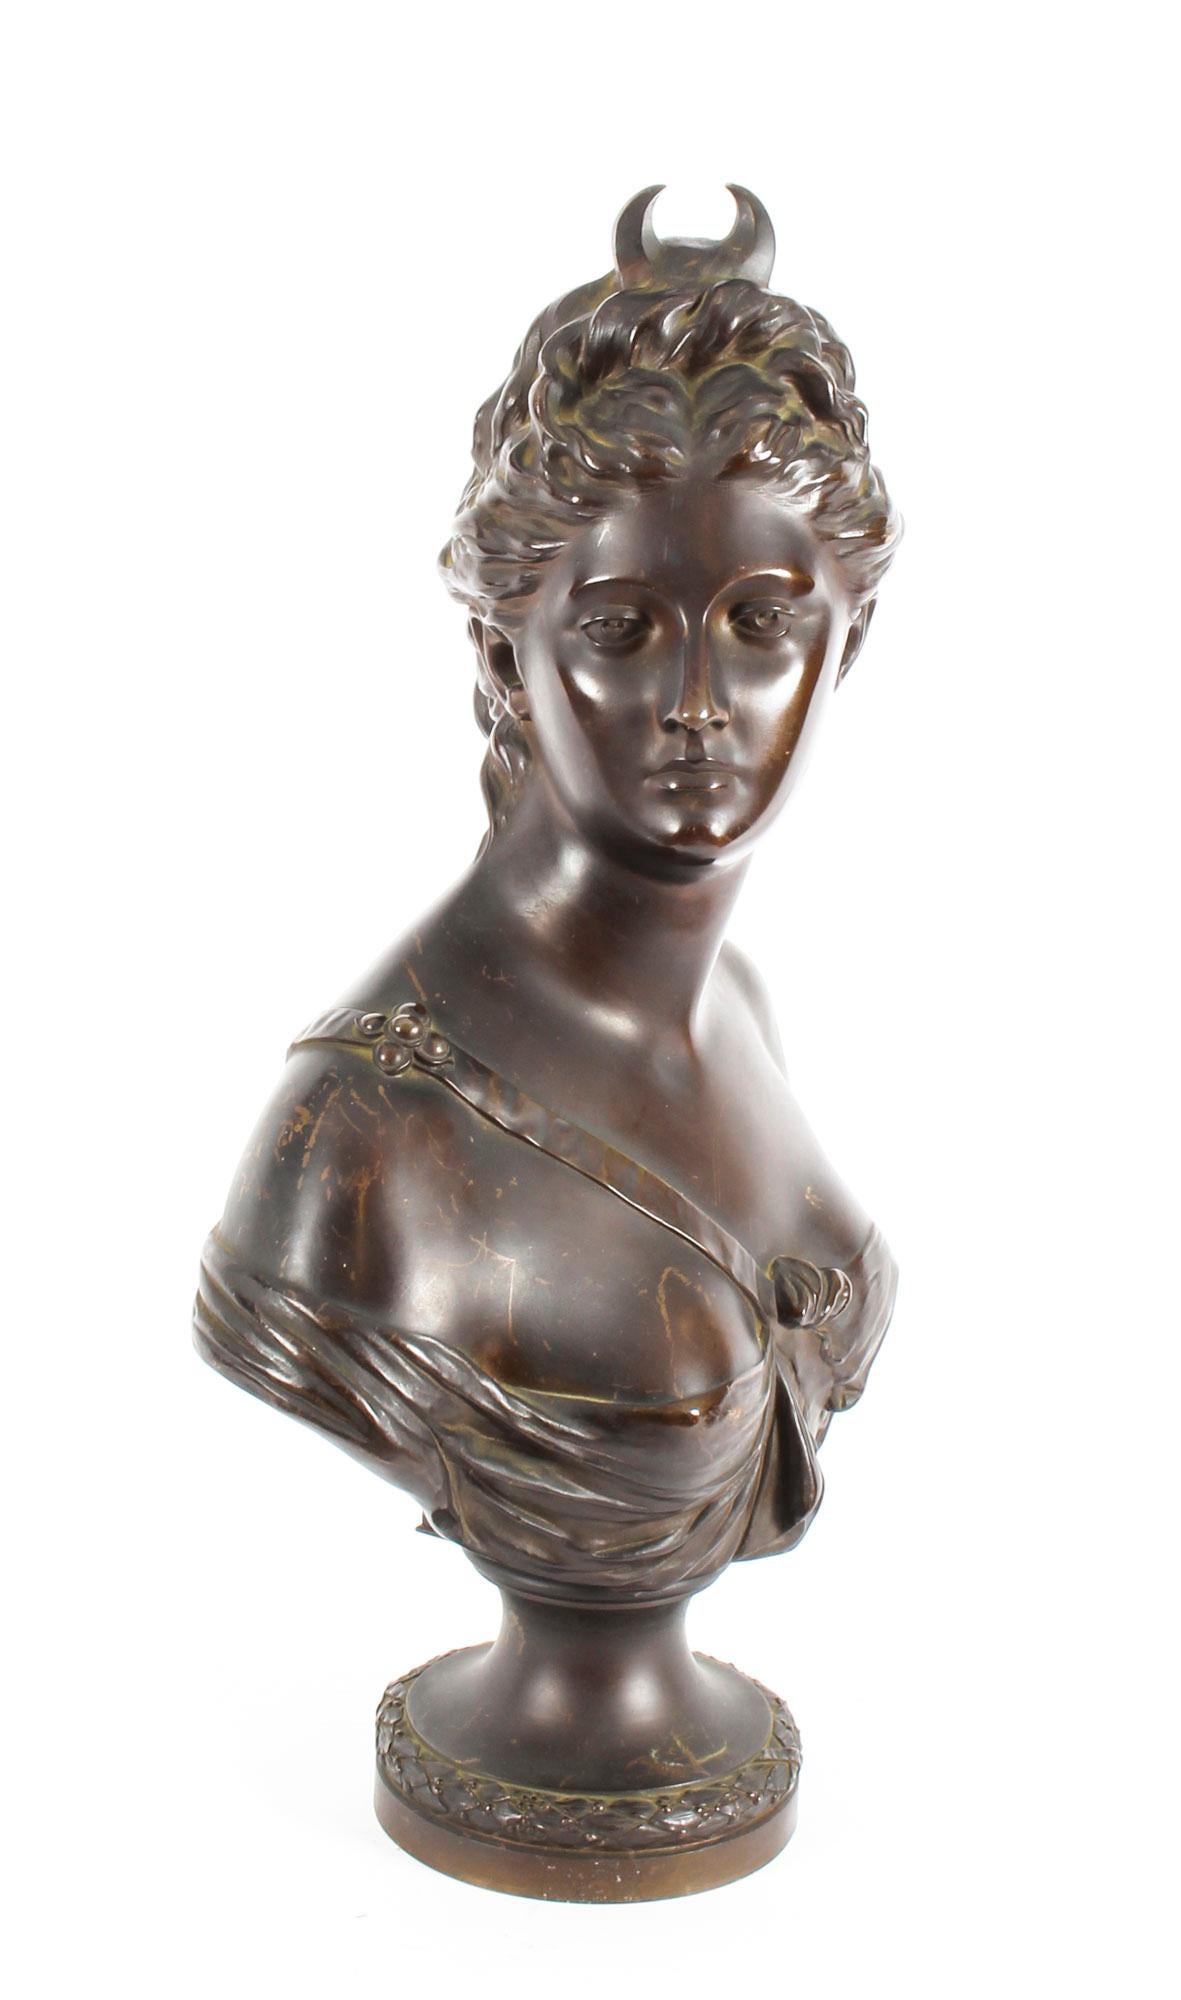 A beautifully sculpted patinated bronze bust of the Roman goddess Diana, after Jean Antoine Houdon (1740-1828), and dating from circa 1880.

The finely sculpted depiction of Diana wearing a classical flowing gown with an interesting crown on her